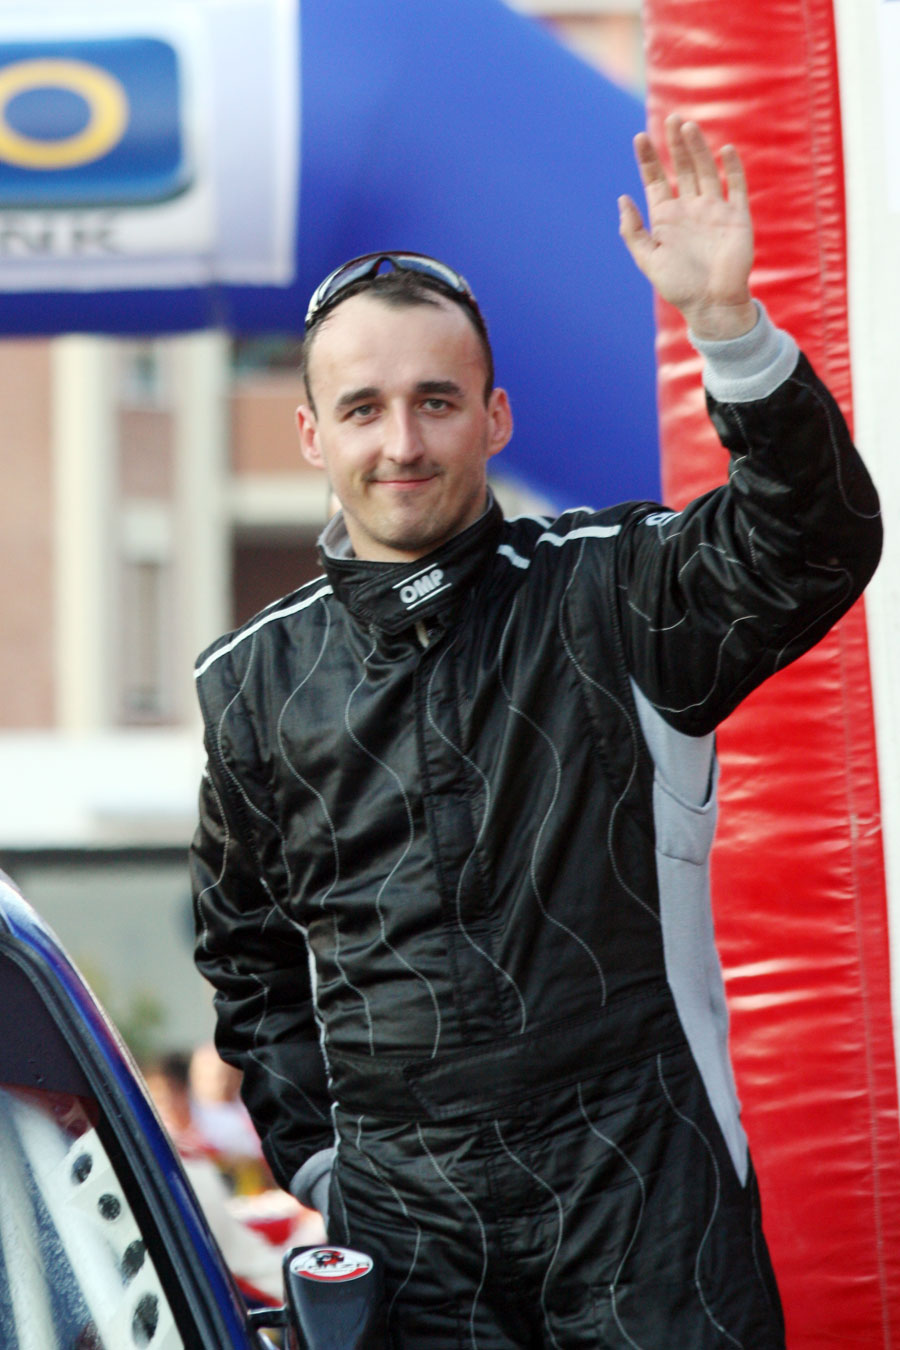 Robert Kubica waves to the crowd on the podium